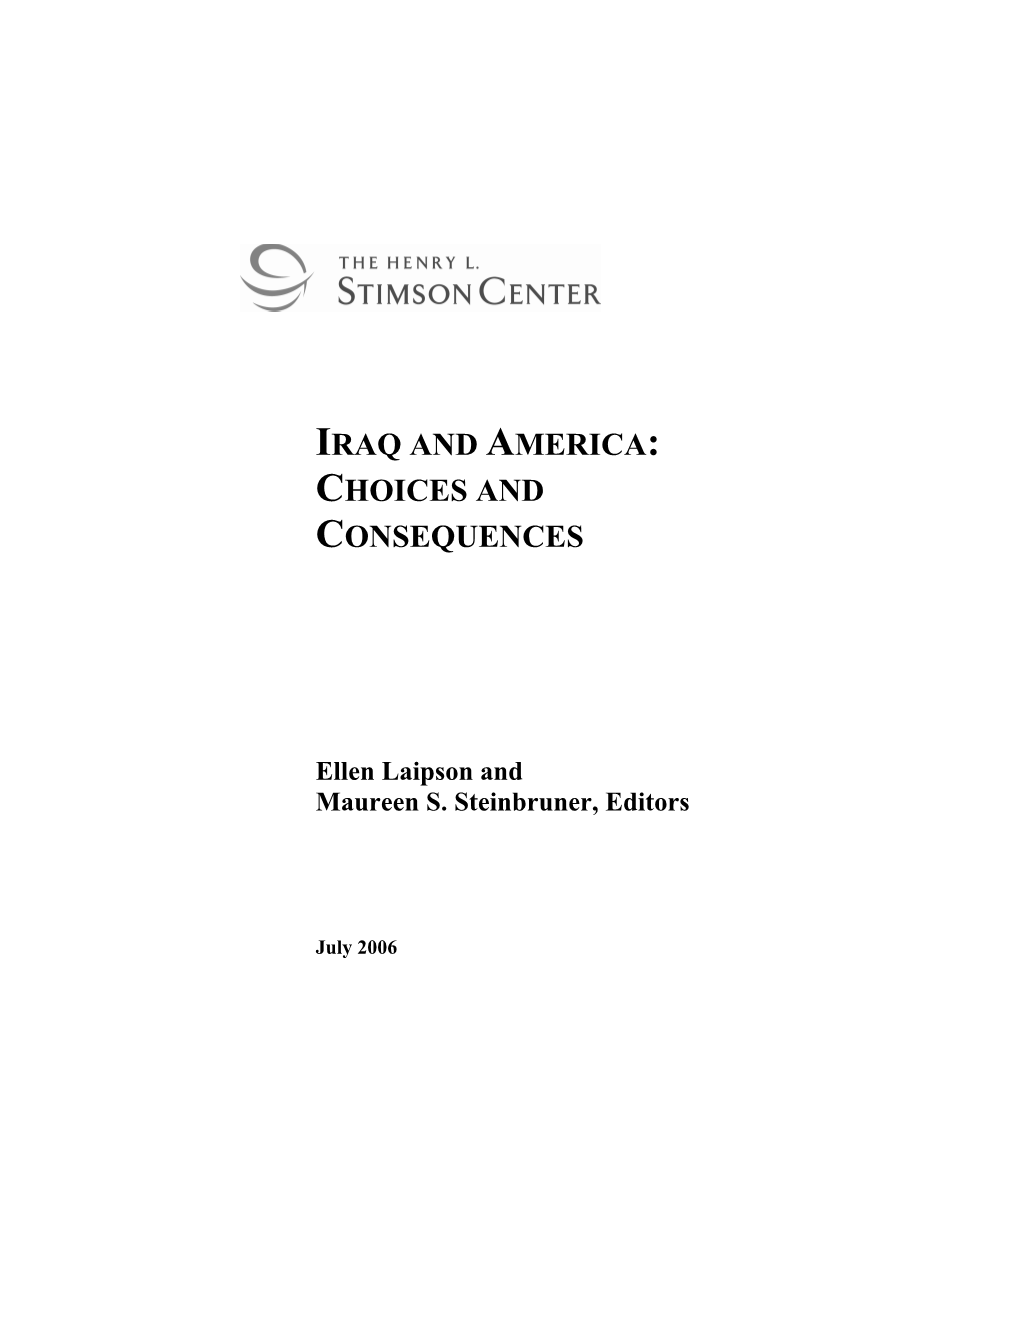 Iraq and America: Choices and Consequences